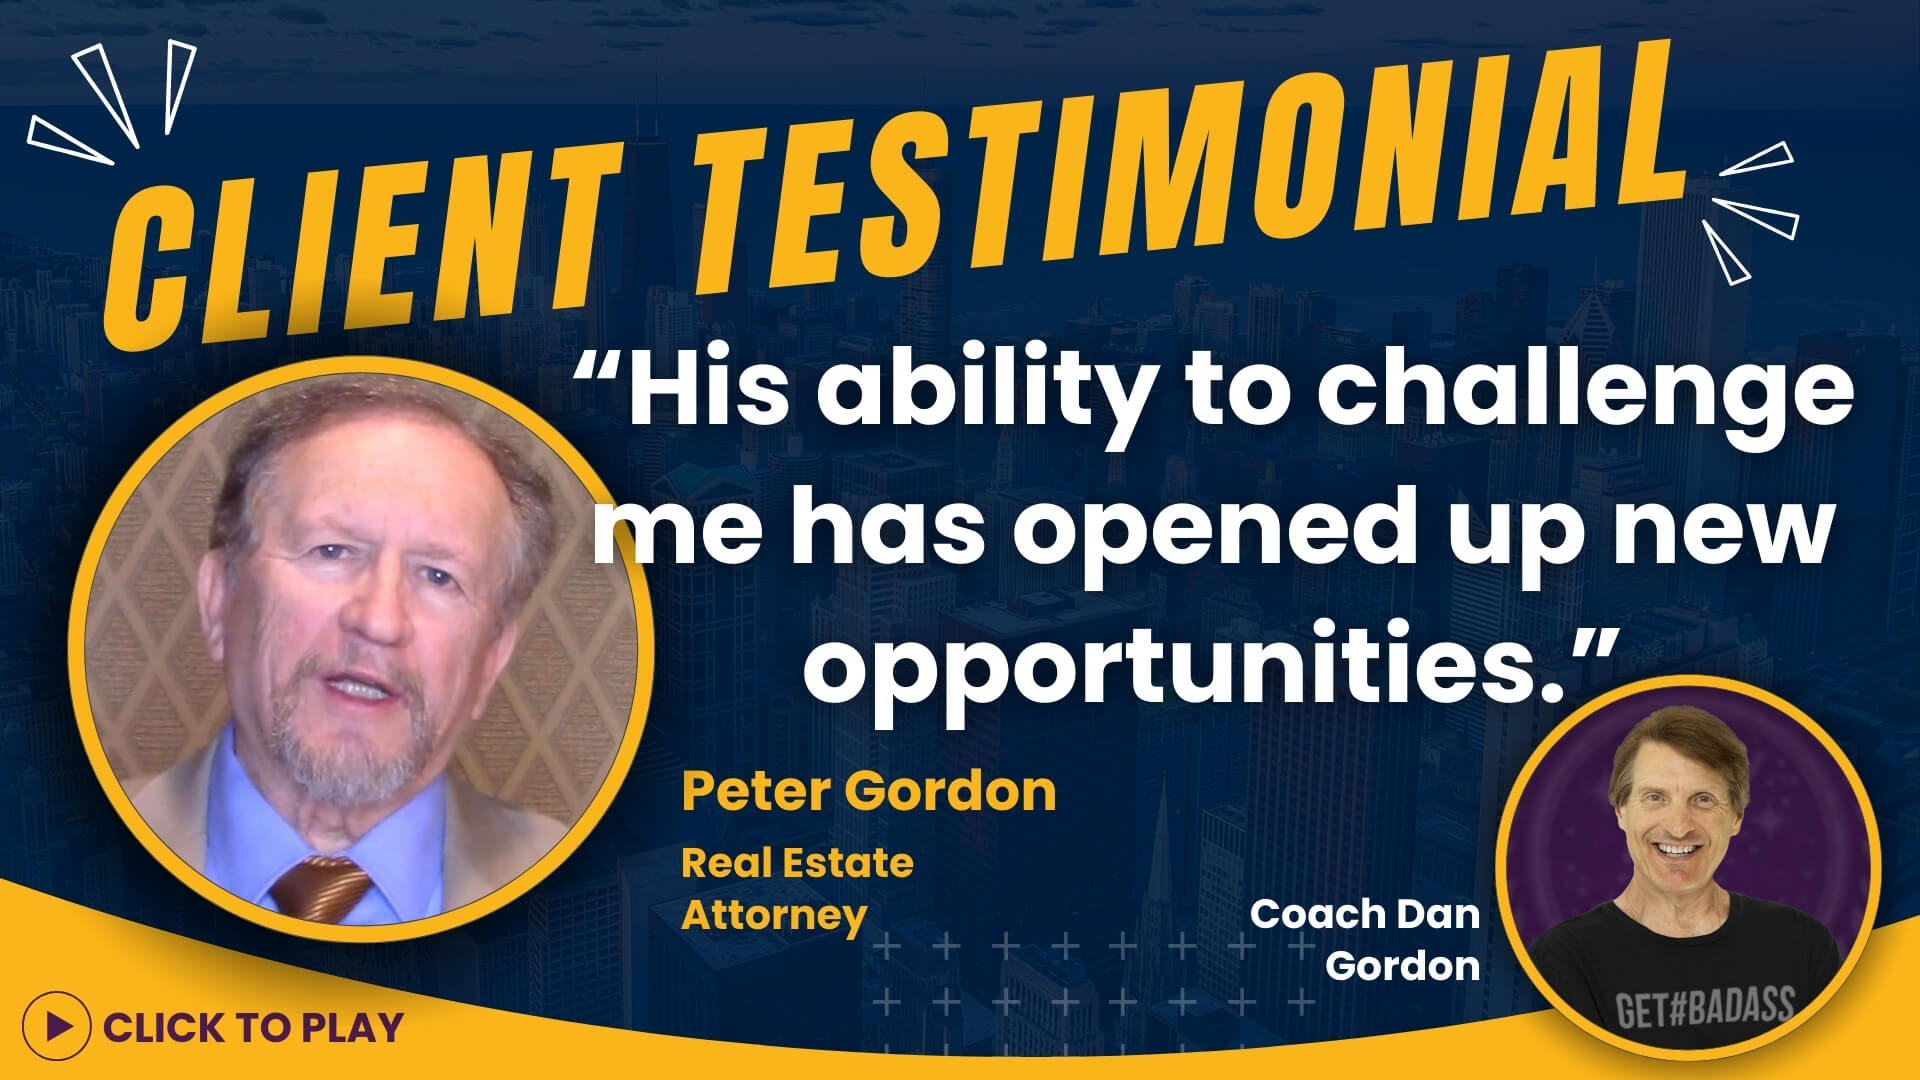 Client testimonial by Peter Gordon, a Real Estate Attorney, featuring his quote on Coach Dan Gordon's impact, with 'CLICK TO PLAY' button.